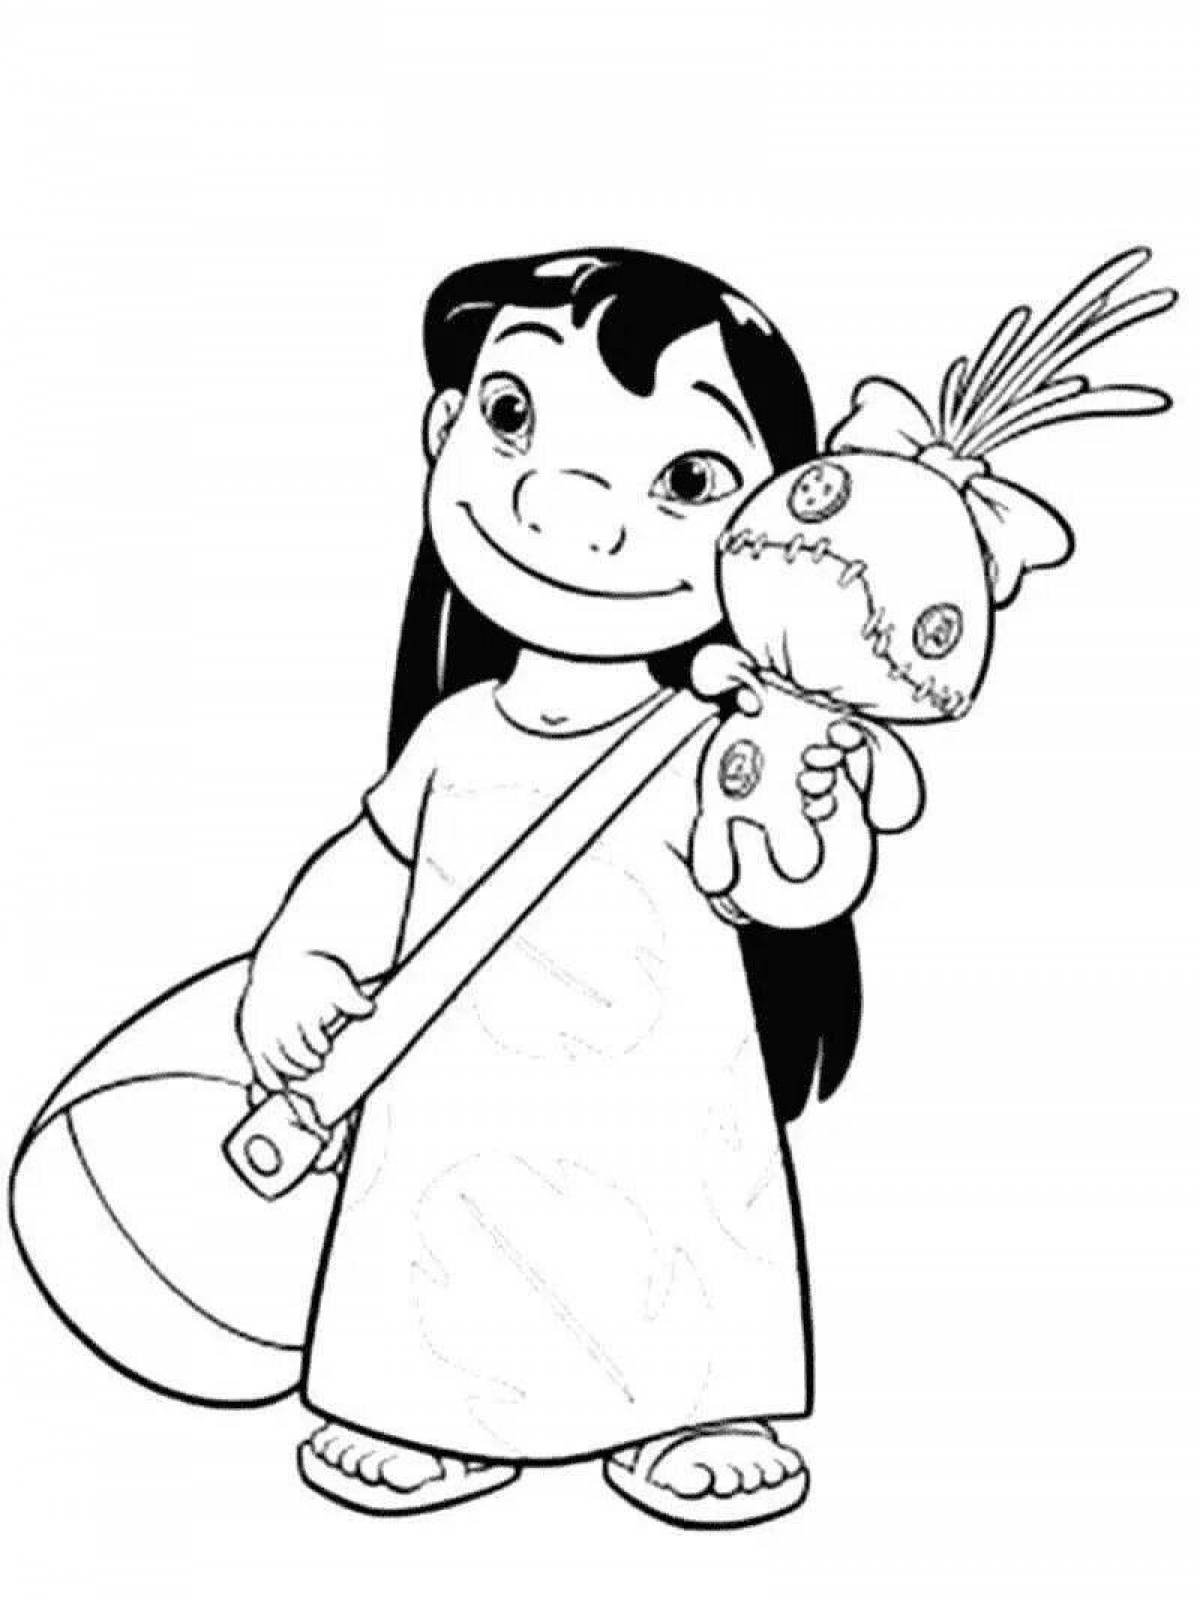 Exquisite lilo and stitch coloring book for girls